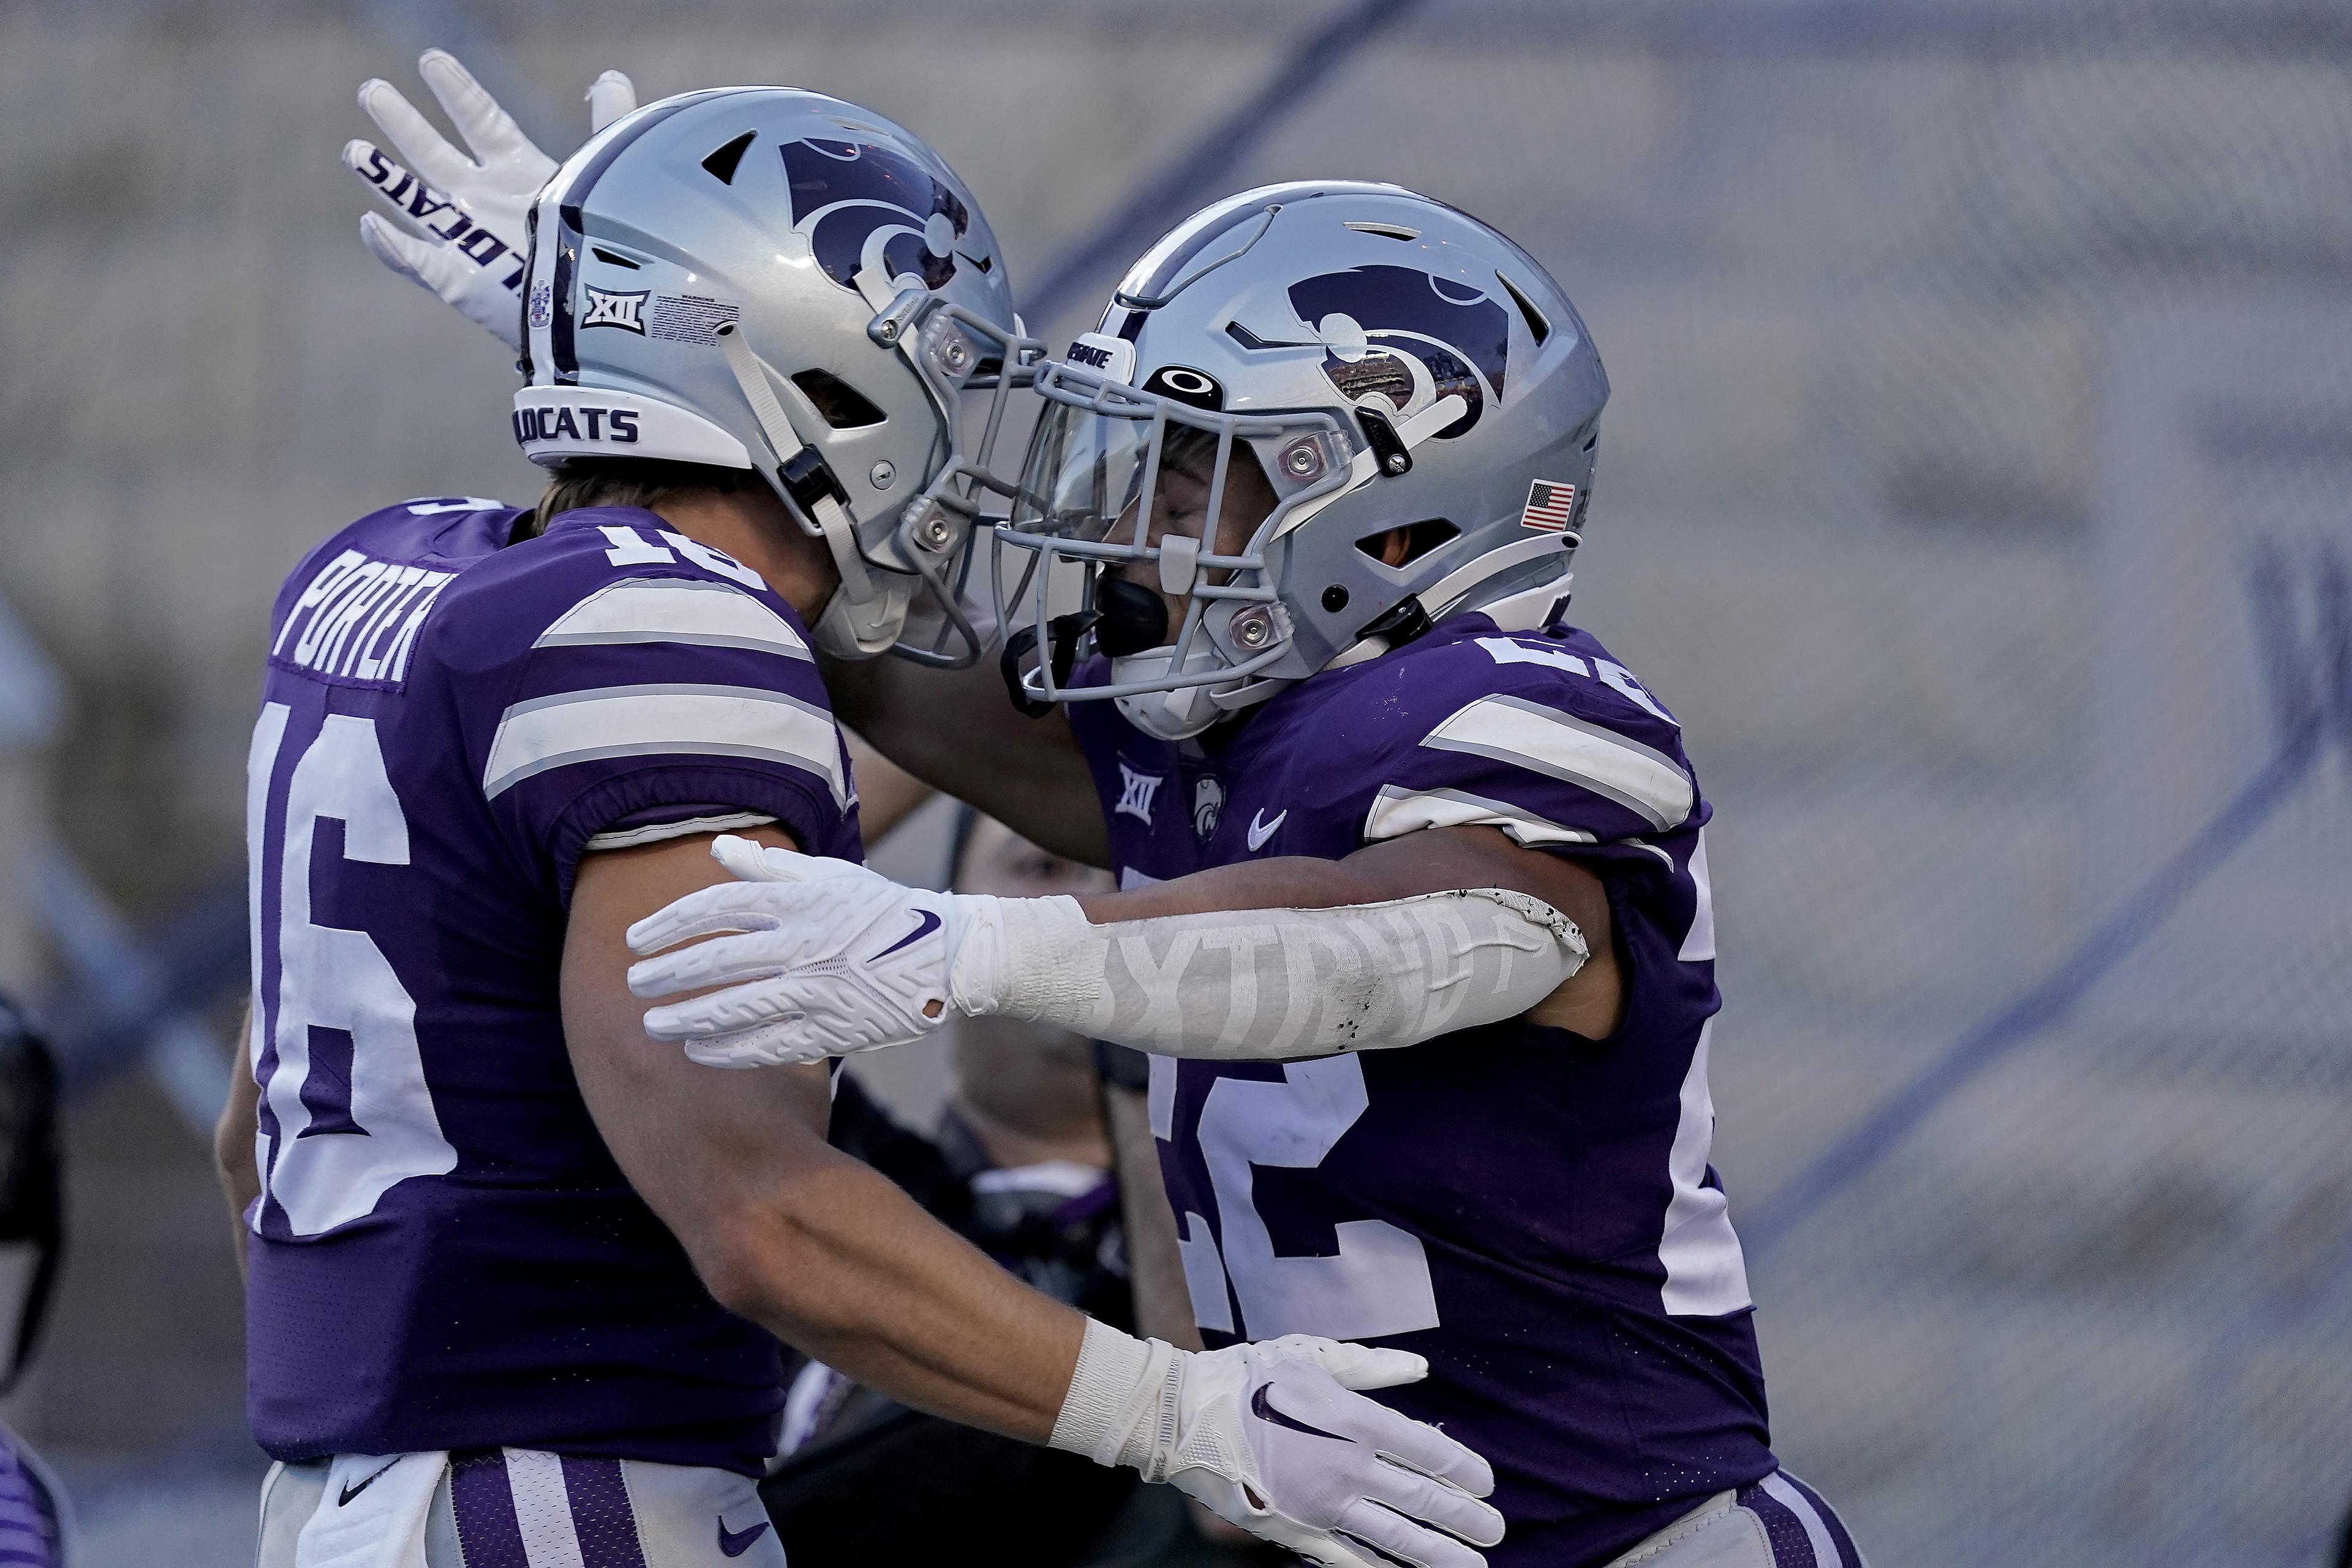 <p>Kansas State running back Deuce Vaughn, right, celebrates with Kansas State wide receiver Seth Porter after scoring a touchdown during the first half of an NCAA college football game against South Dakota Saturday, Sept. 3, 2022, in Manhattan, Kan. (AP Photo/Charlie Riedel)</p>
